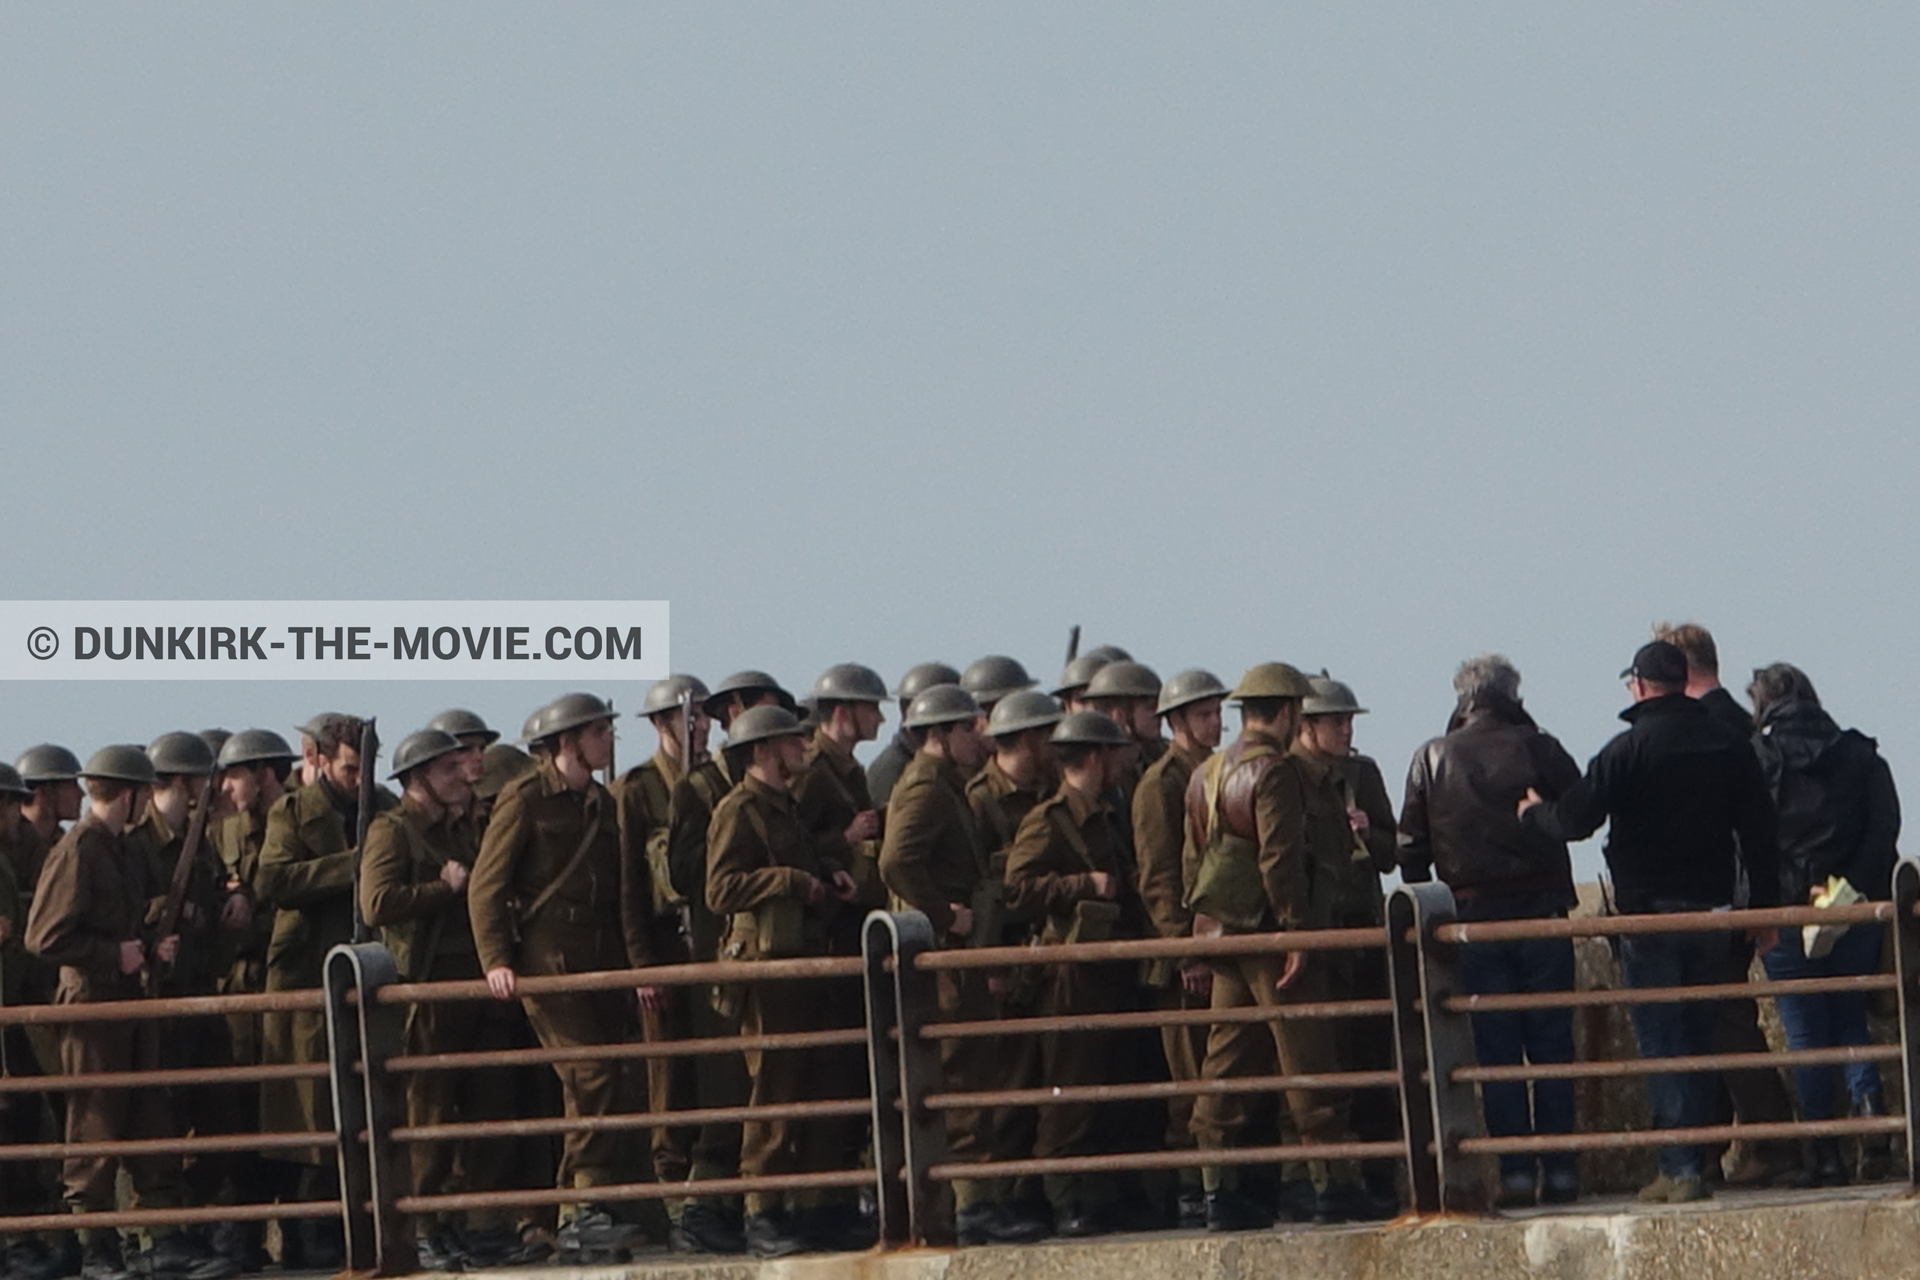 Picture with supernumeraries, EST pier, Christopher Nolan, Nilo Otero,  from behind the scene of the Dunkirk movie by Nolan